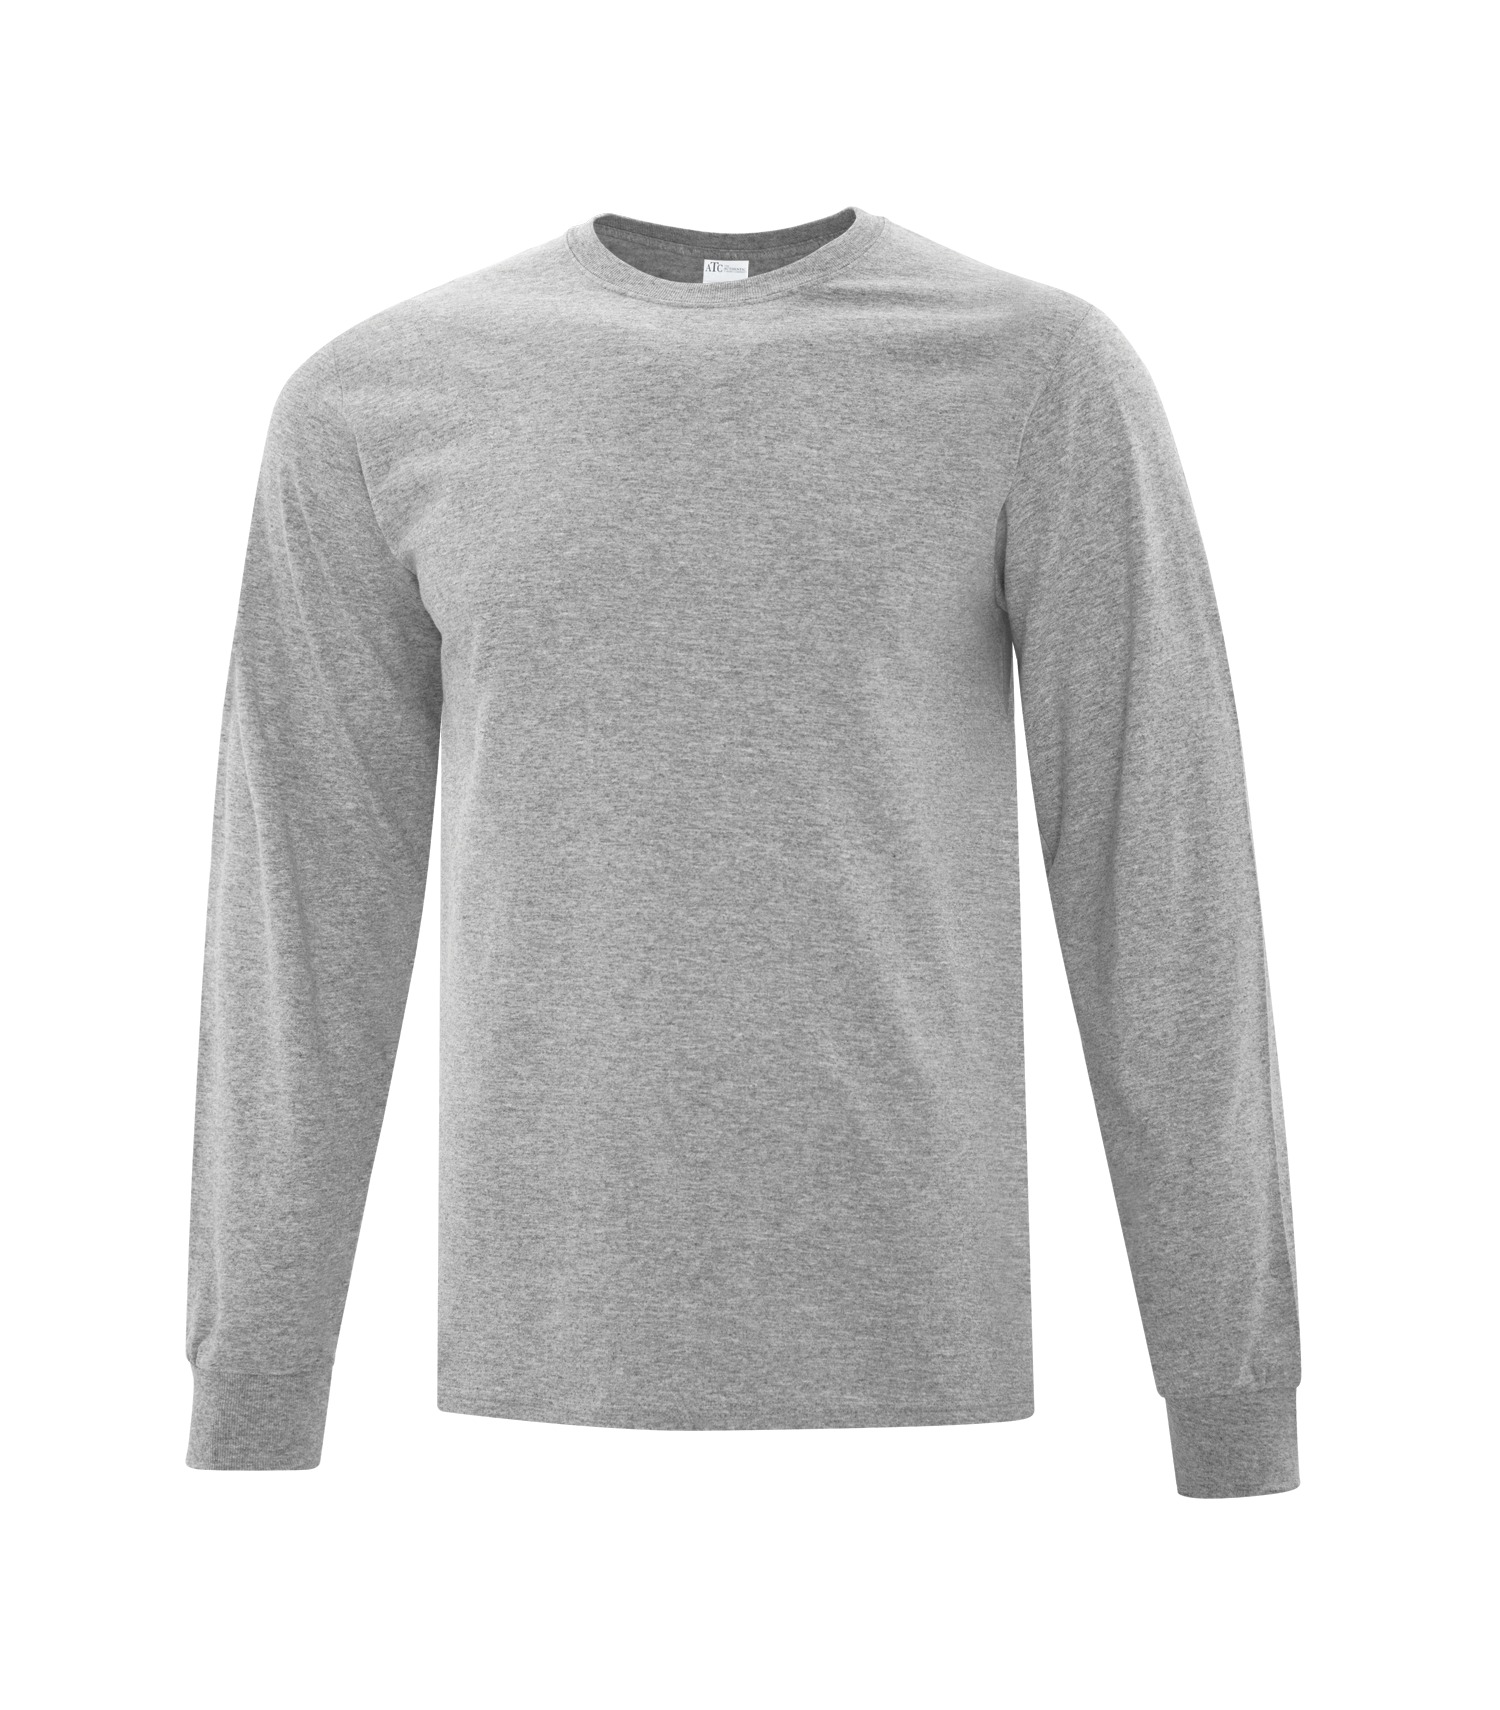 ATC 1015 EVERYDAY COTTON LONG SLEEVE TEE - Great West Graphics